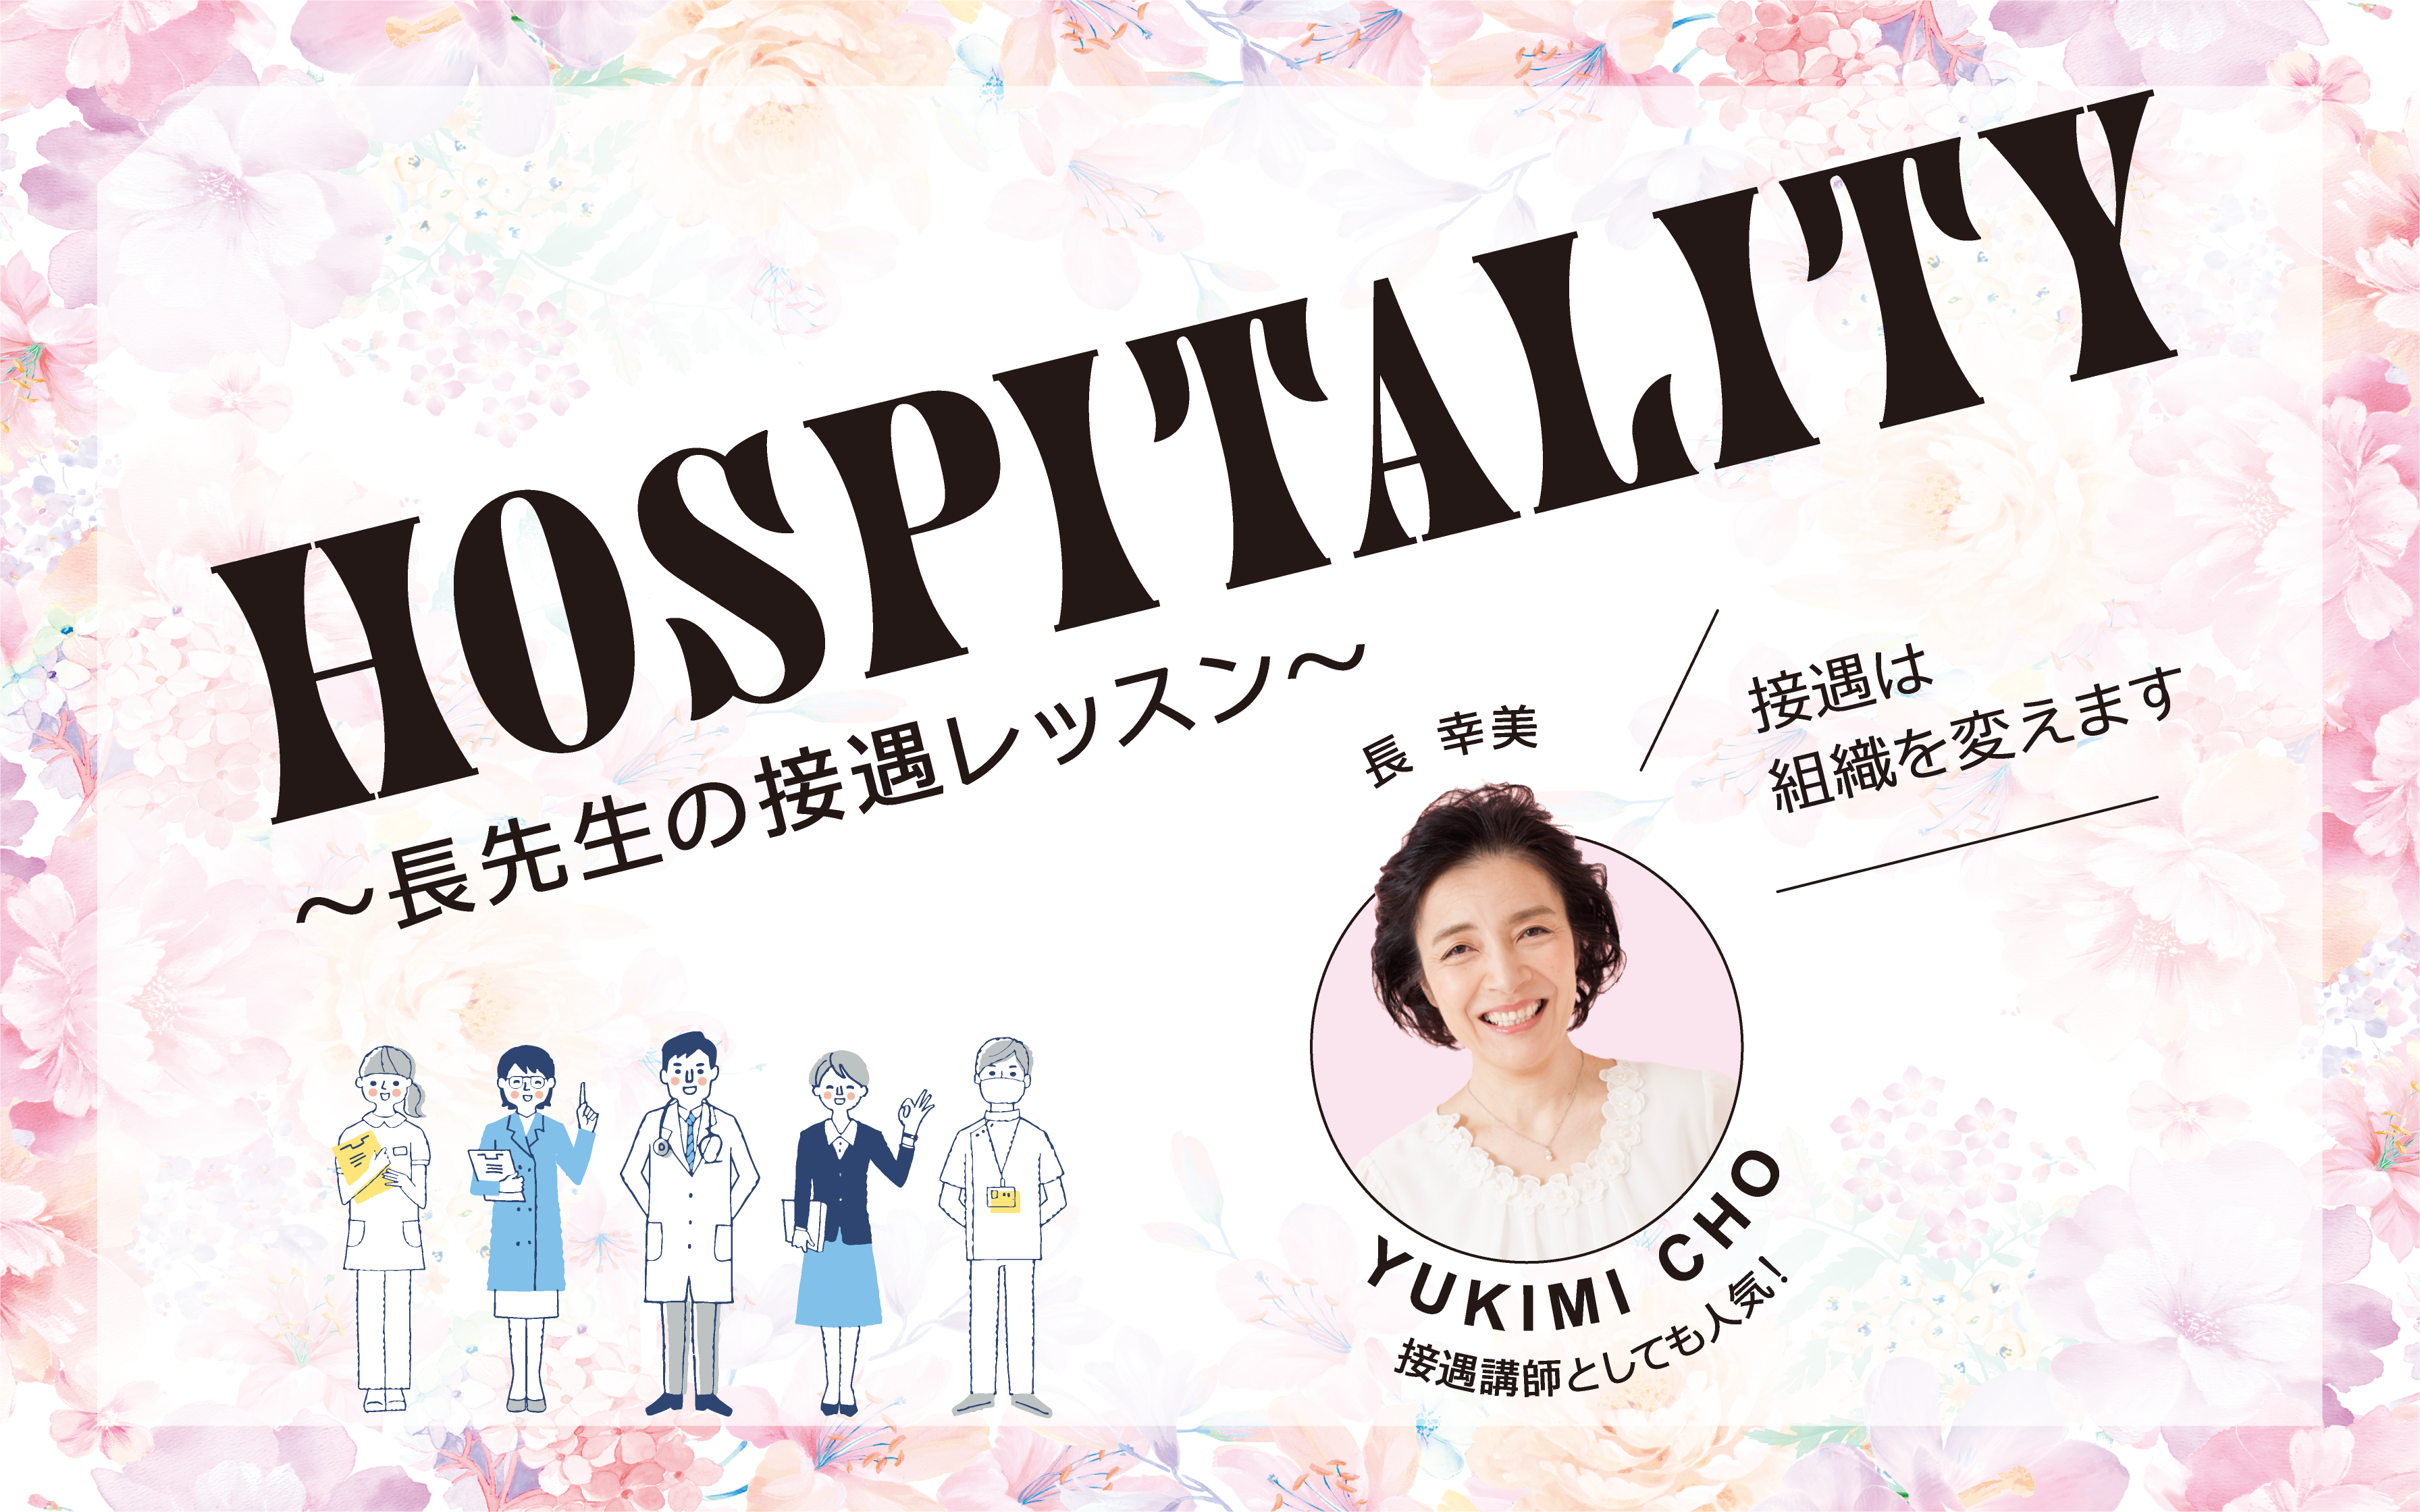 You are currently viewing HOSPITALITY 〜長先生の接遇レッスン〜 VOL.31　職場での会話力〜挨拶プラスαの効果〜